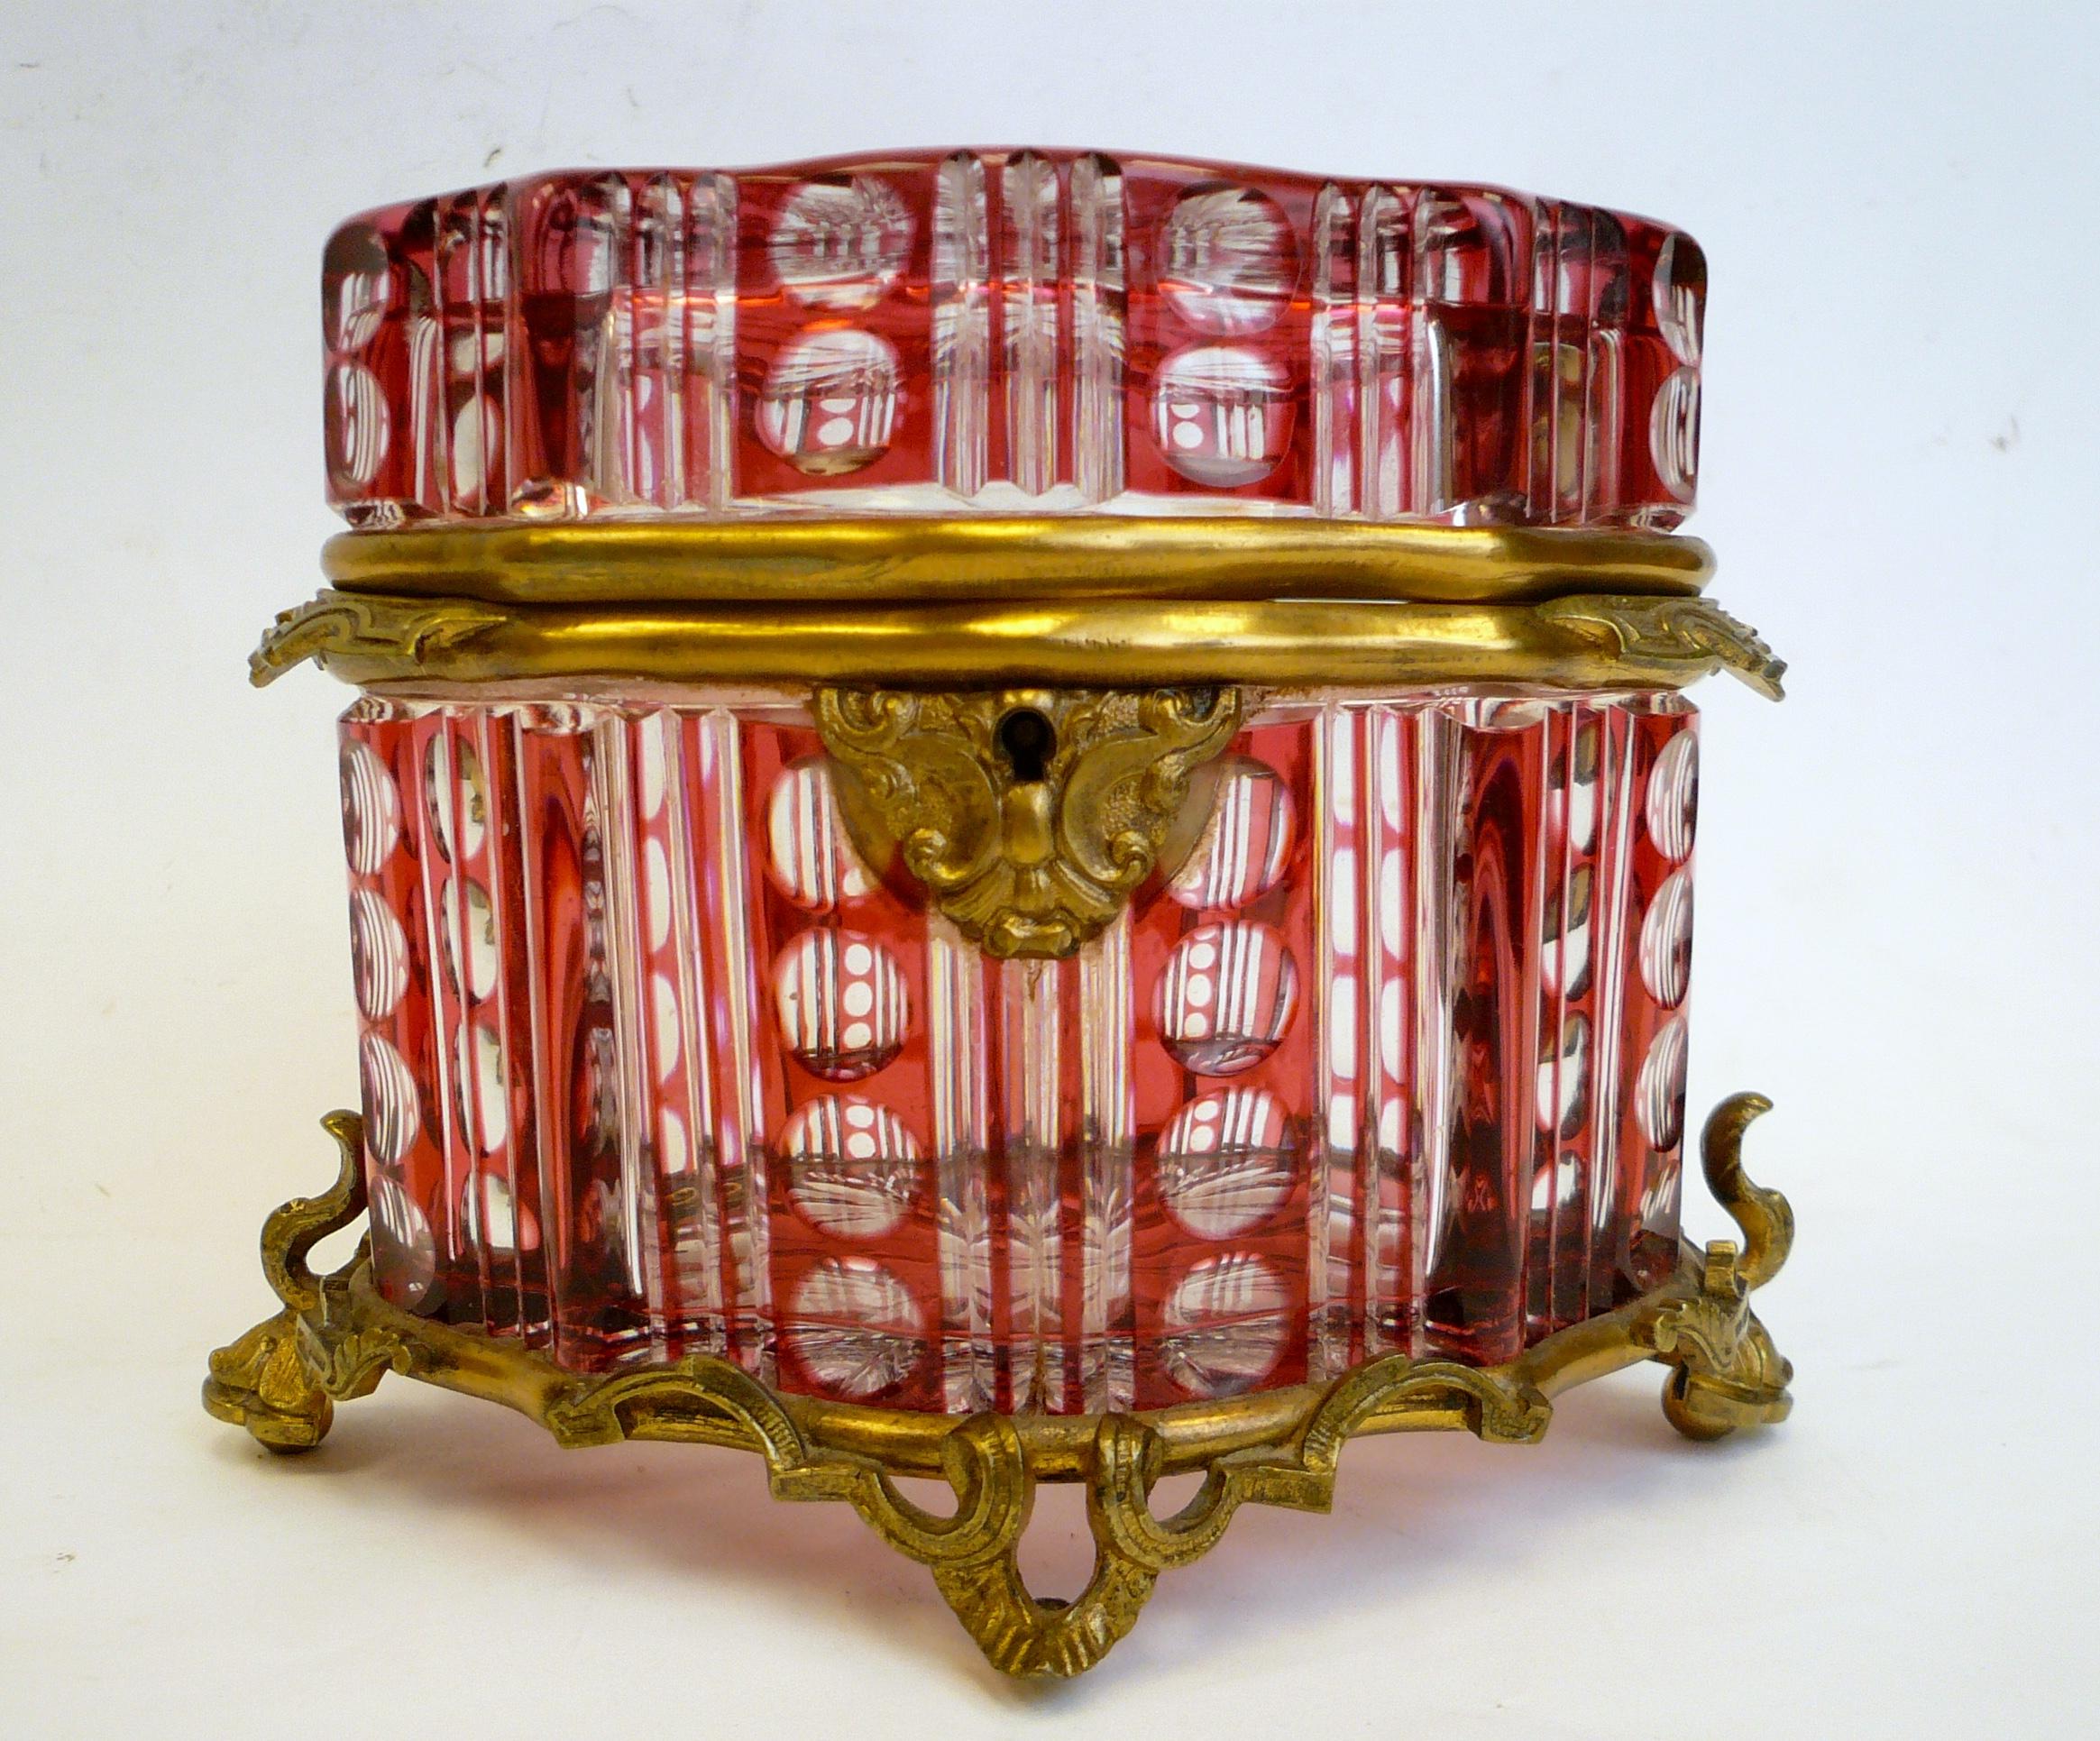 This cased glass {ruby to clear} jewel box, or casket is deeply and elaborately cut.
It is of the finest quality, and retains its original key.